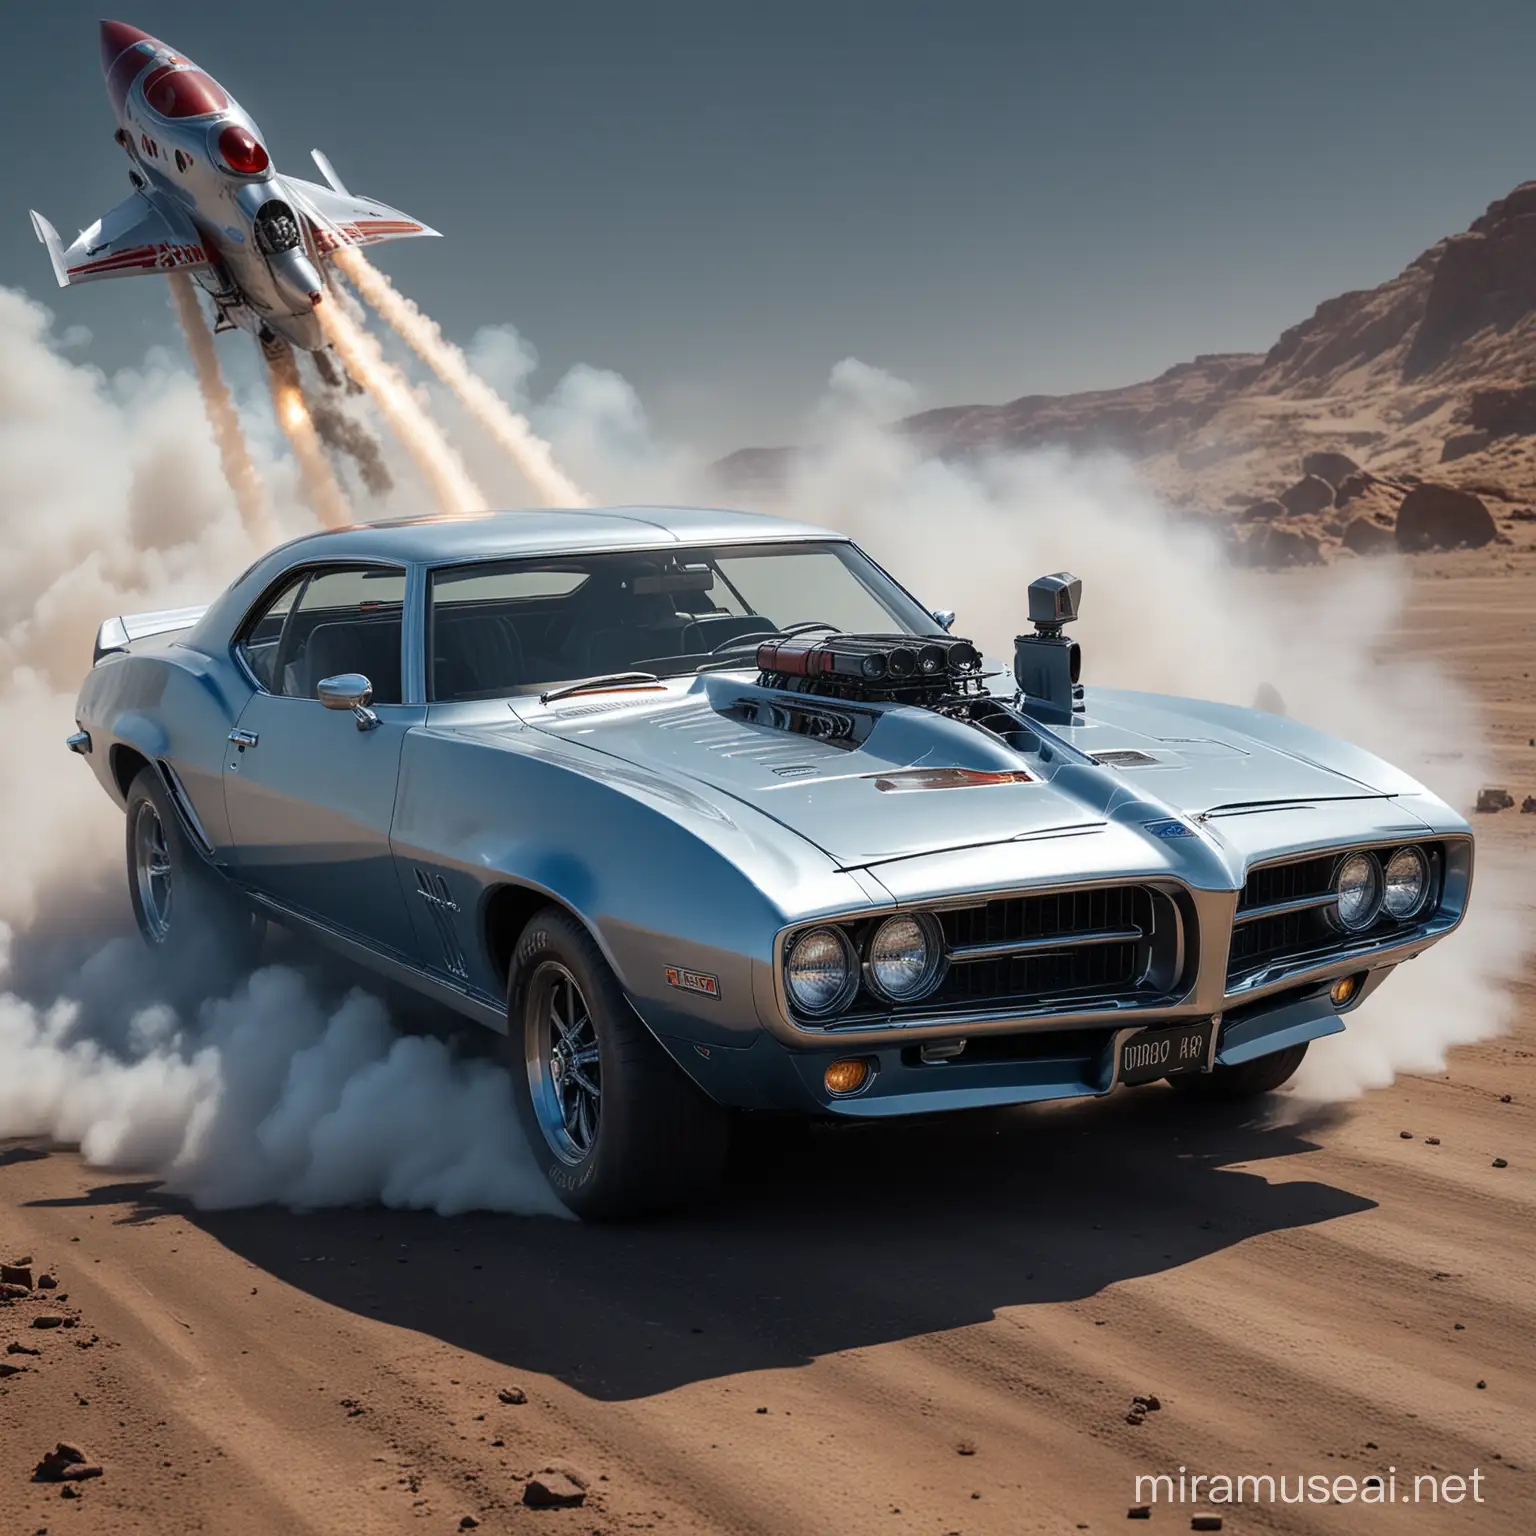 photorealistic, ultra-high-quality image of a silver and blue steampunk mechanical 1969 firebird with Pontiac front grill, red chrome biomechanical engine, wide rocket thruster type silver chrome wheels, all windows blacked out, firebird and Pontiac name badges, surrounded by smoke, rotated and being launched vertically like a rocket through the earth atmosphere. huge full moon in background